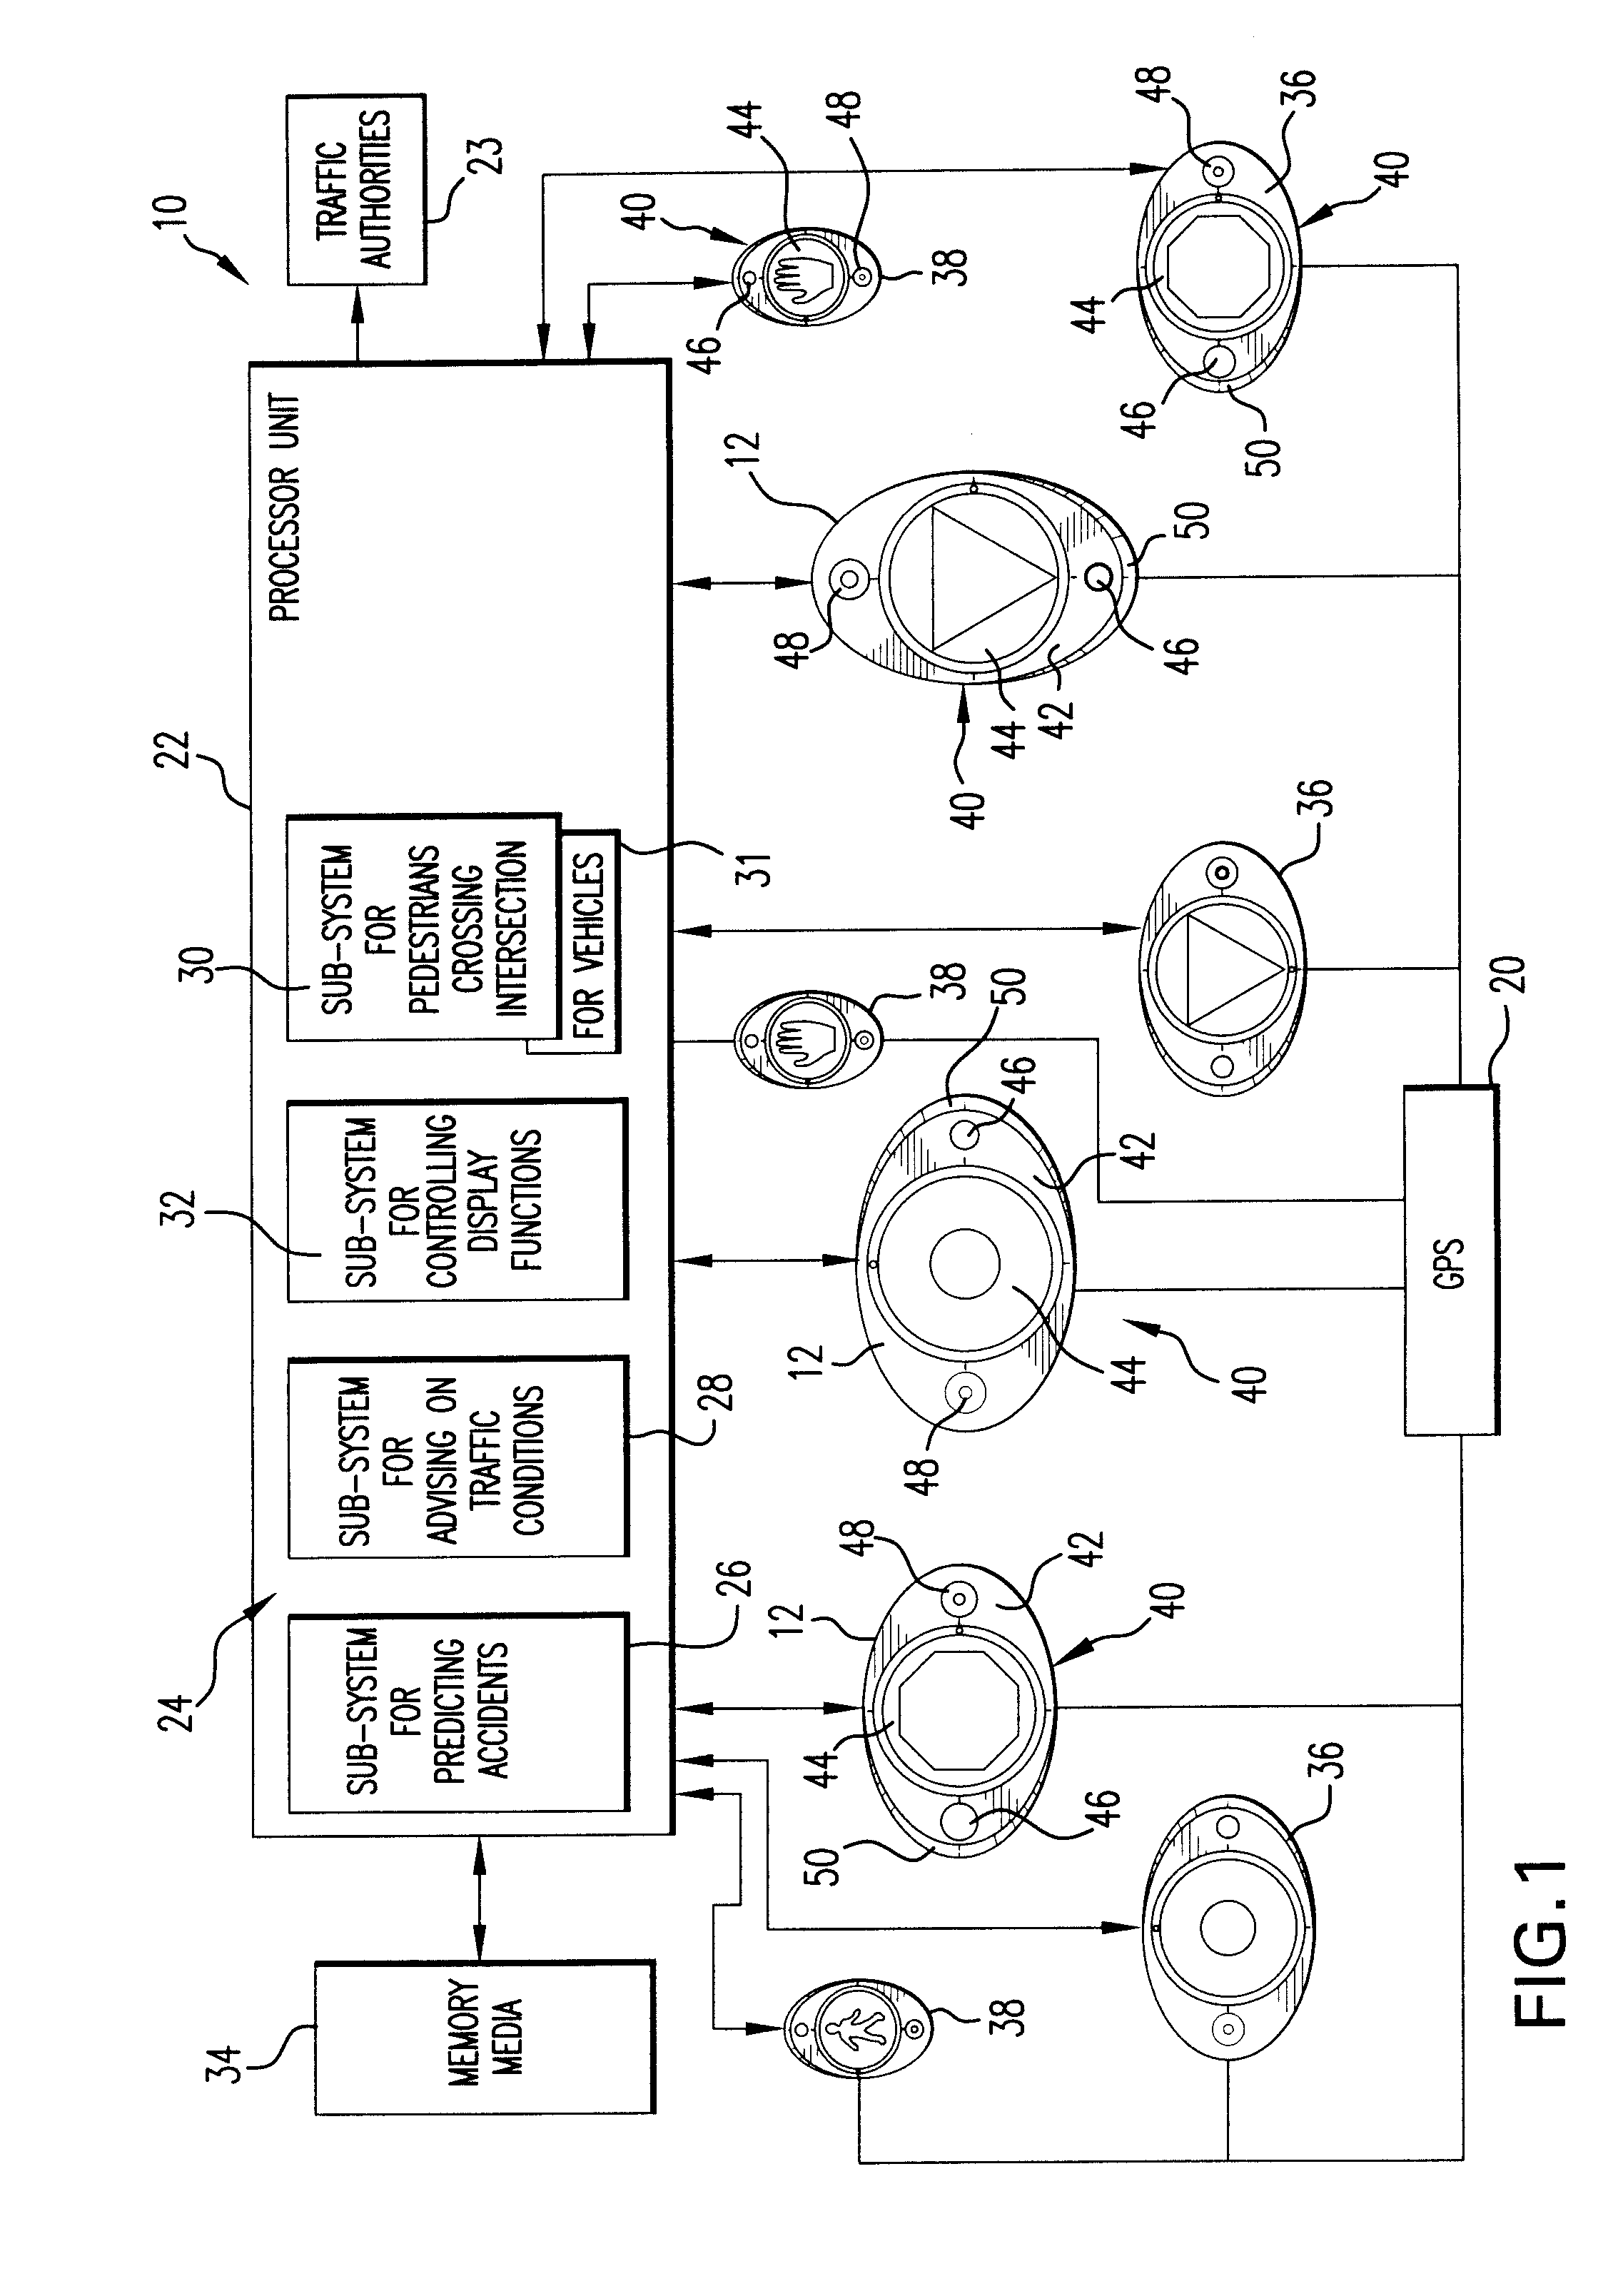 System and method for traffic related information display, traffic surveillance and control